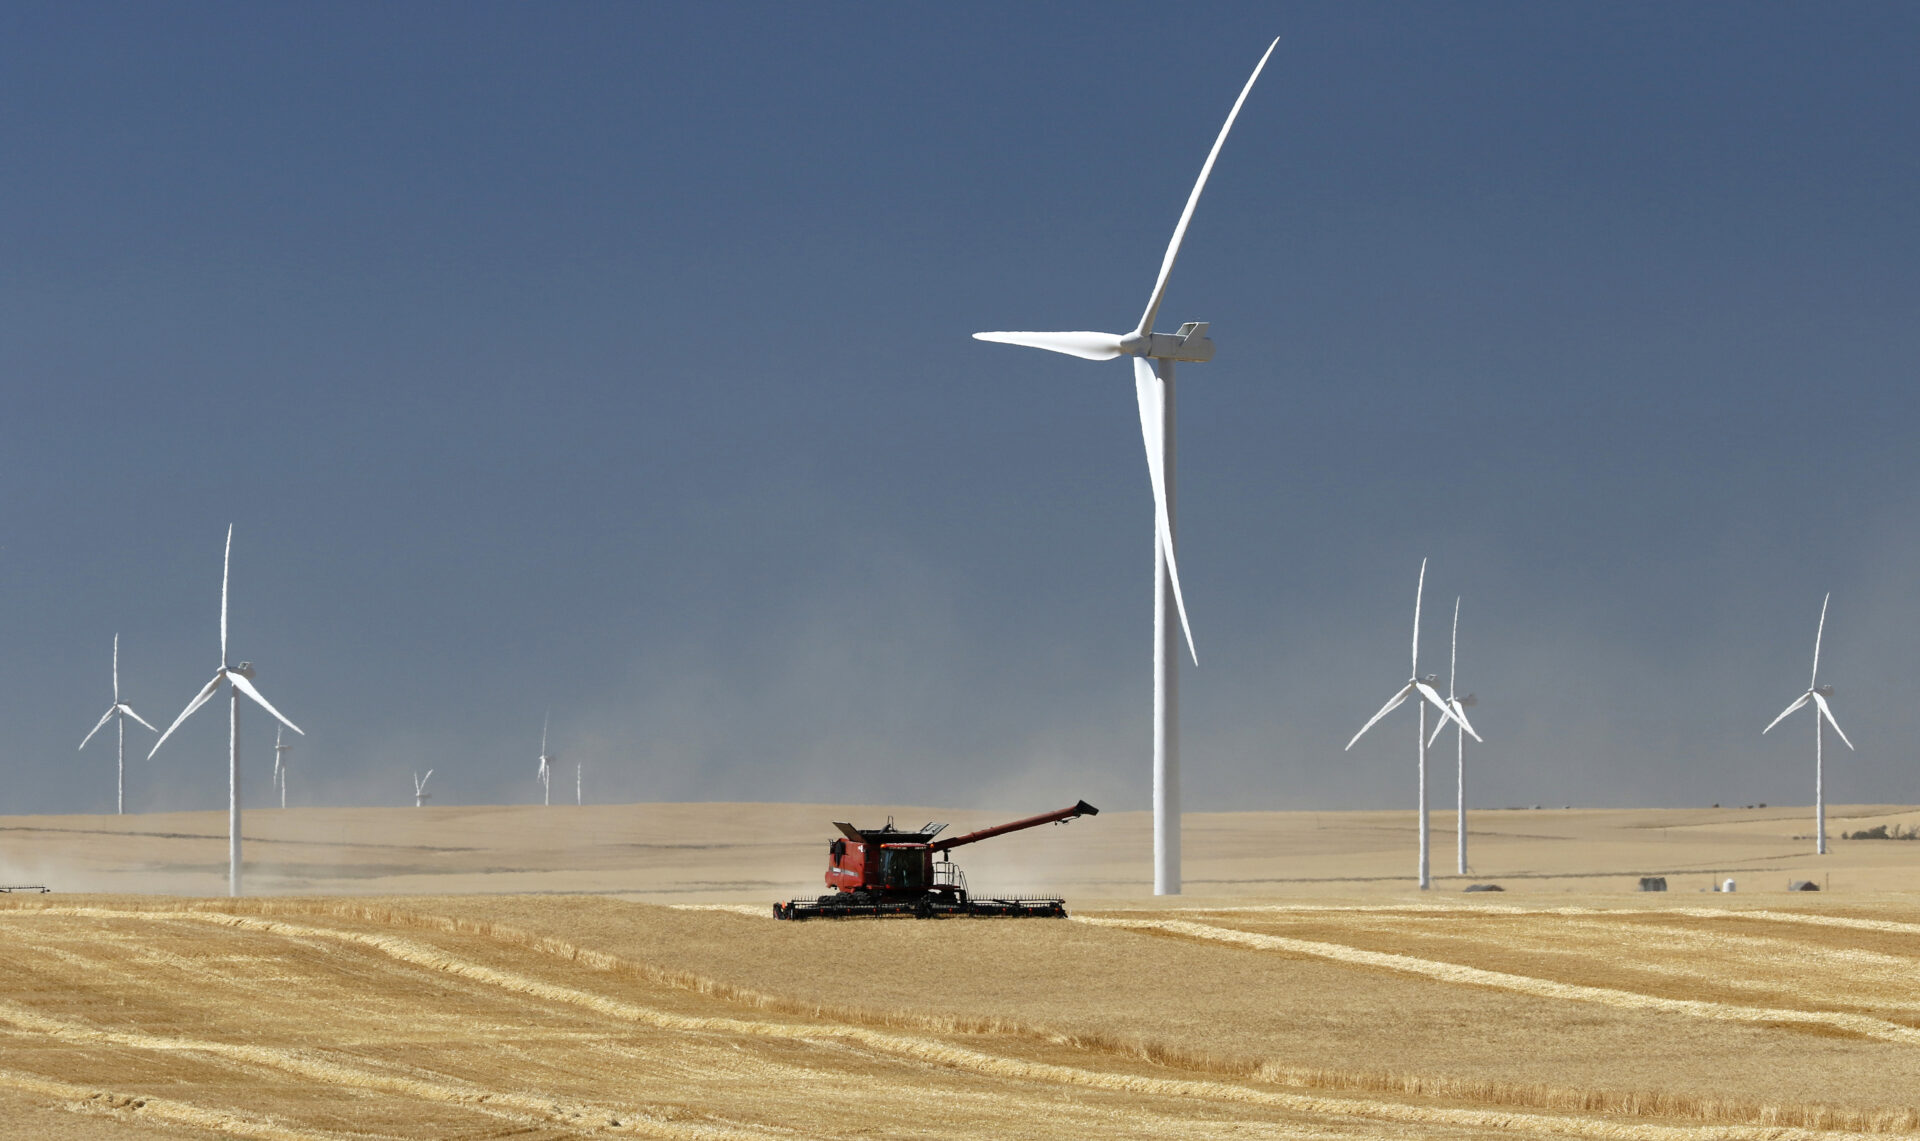 The combine crosses the middle of a golden field with dust rising from the ground. Dozens of tall, white turbines dot the landscape. The sky is dark blue without clouds. A bit of a surreal-looking landscape. 